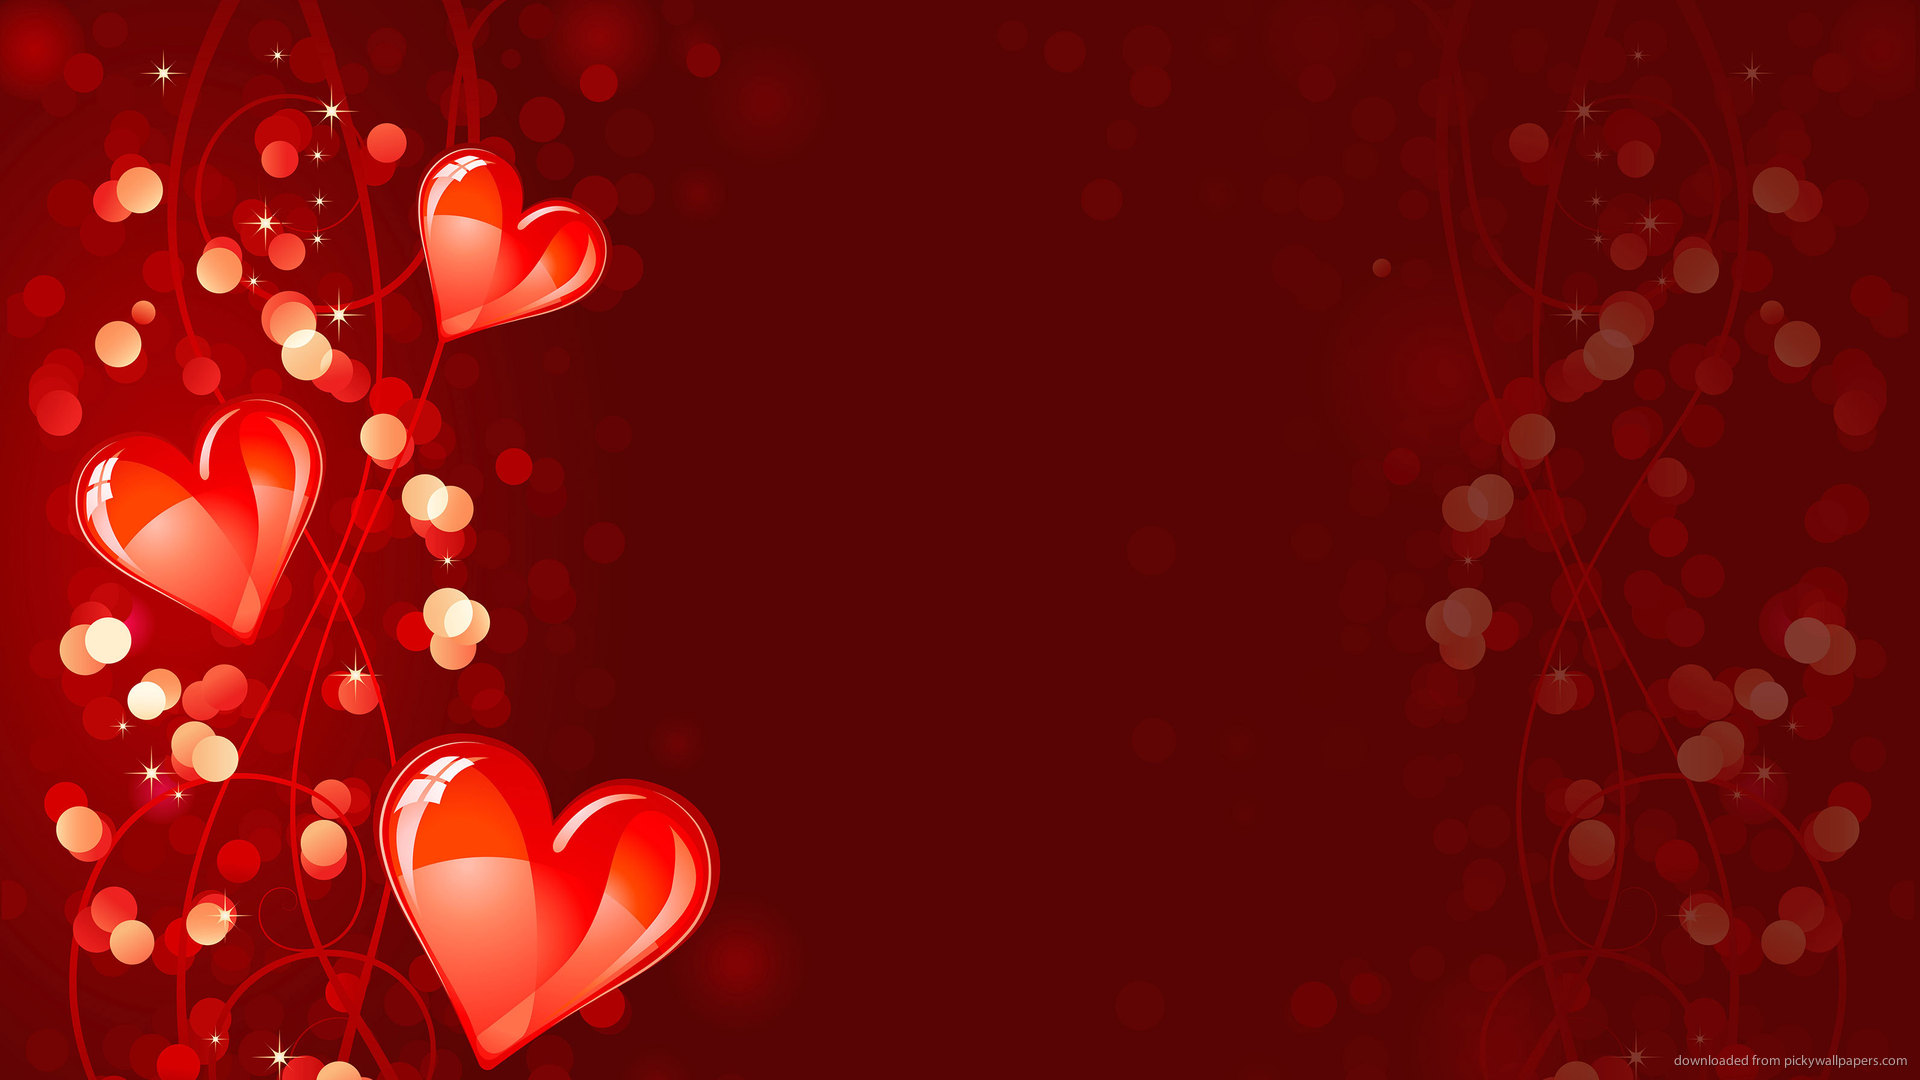 iPad Valentine S Day Hearts Beckground Screensaver For Kindle3 And Dx